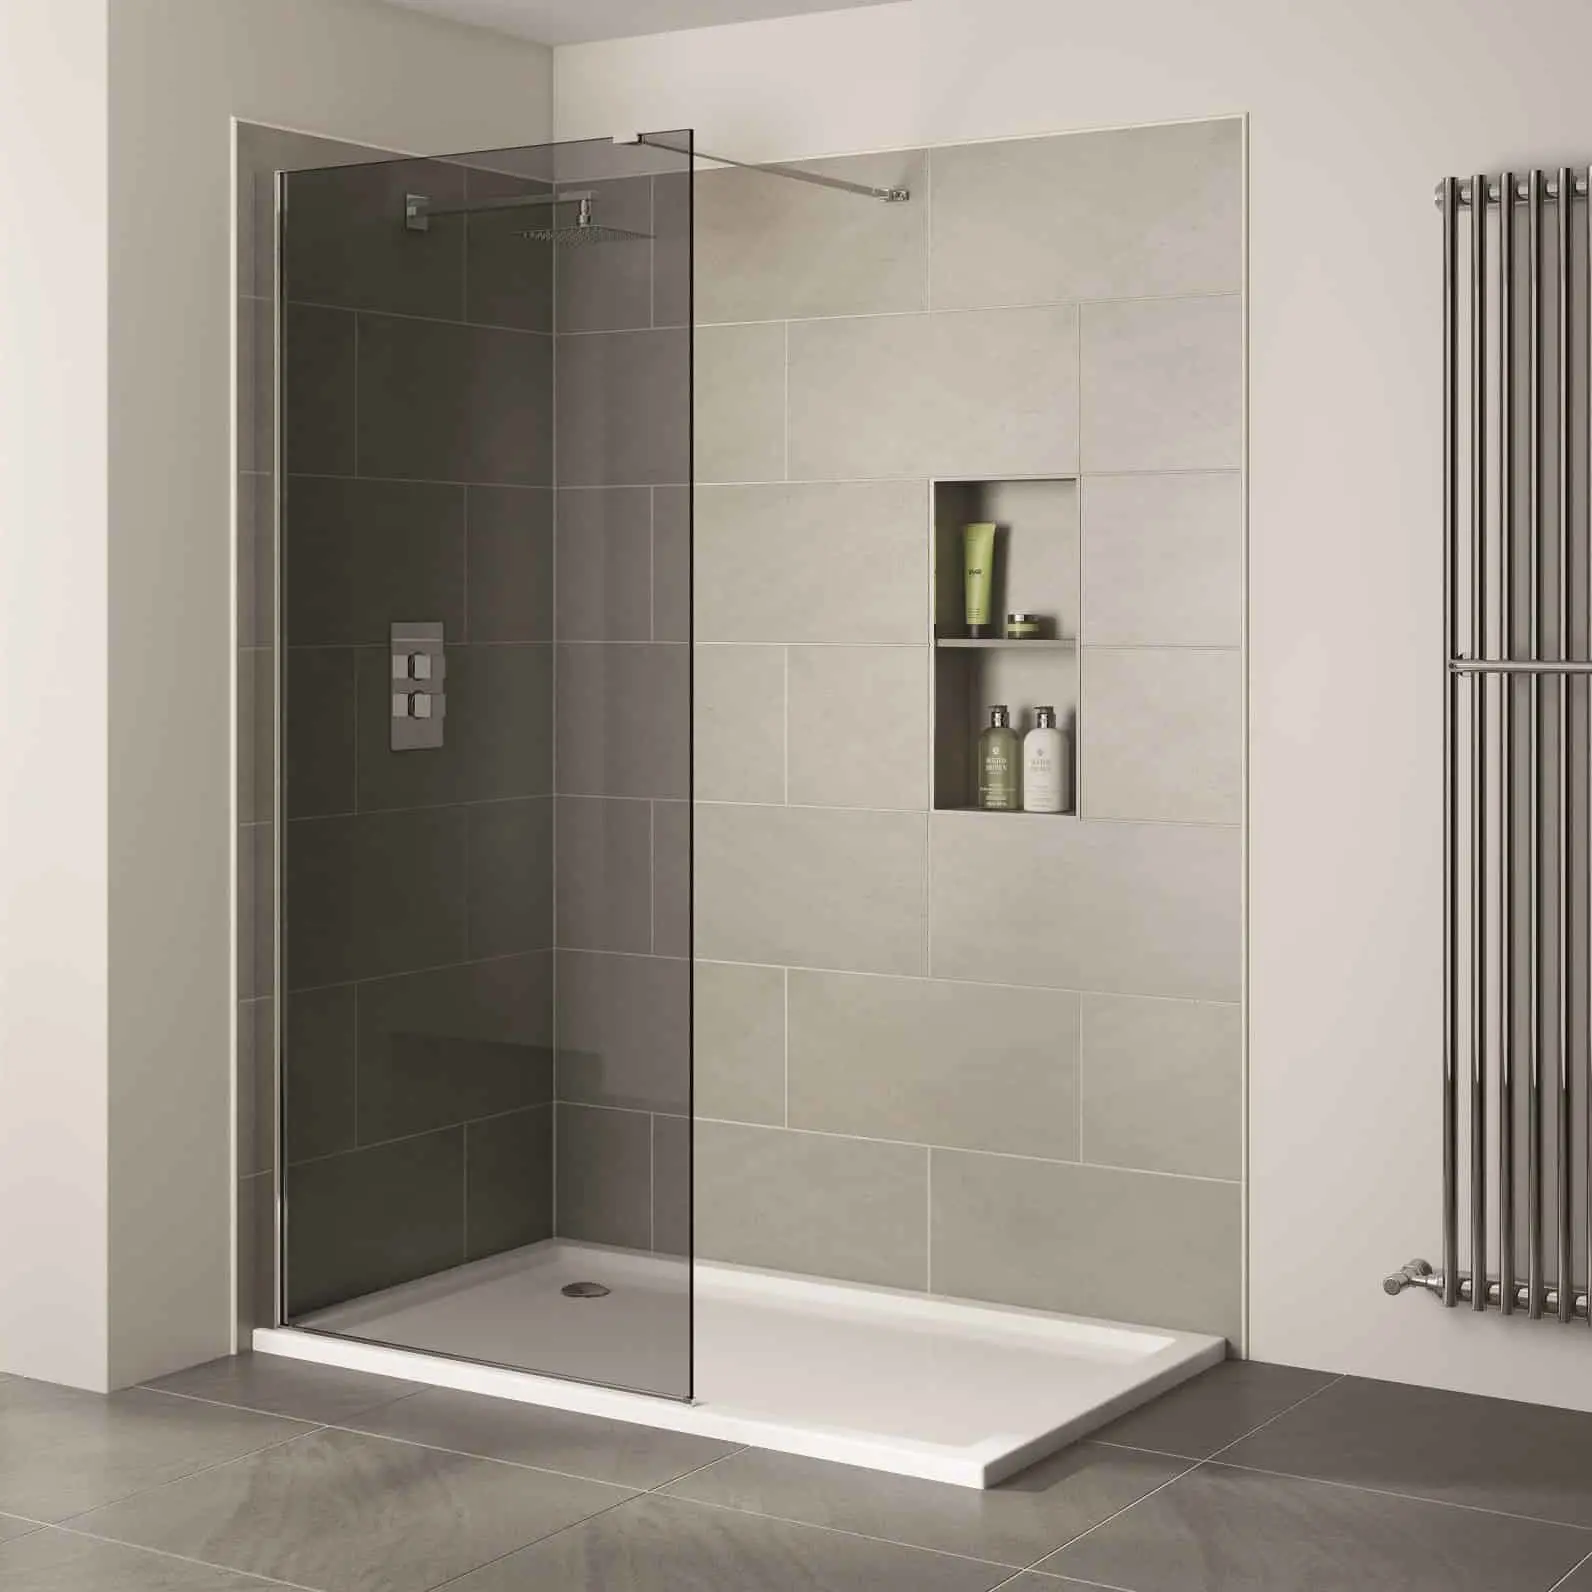 smoked glass wetroom screen - Can you put a shower screen in a wet room